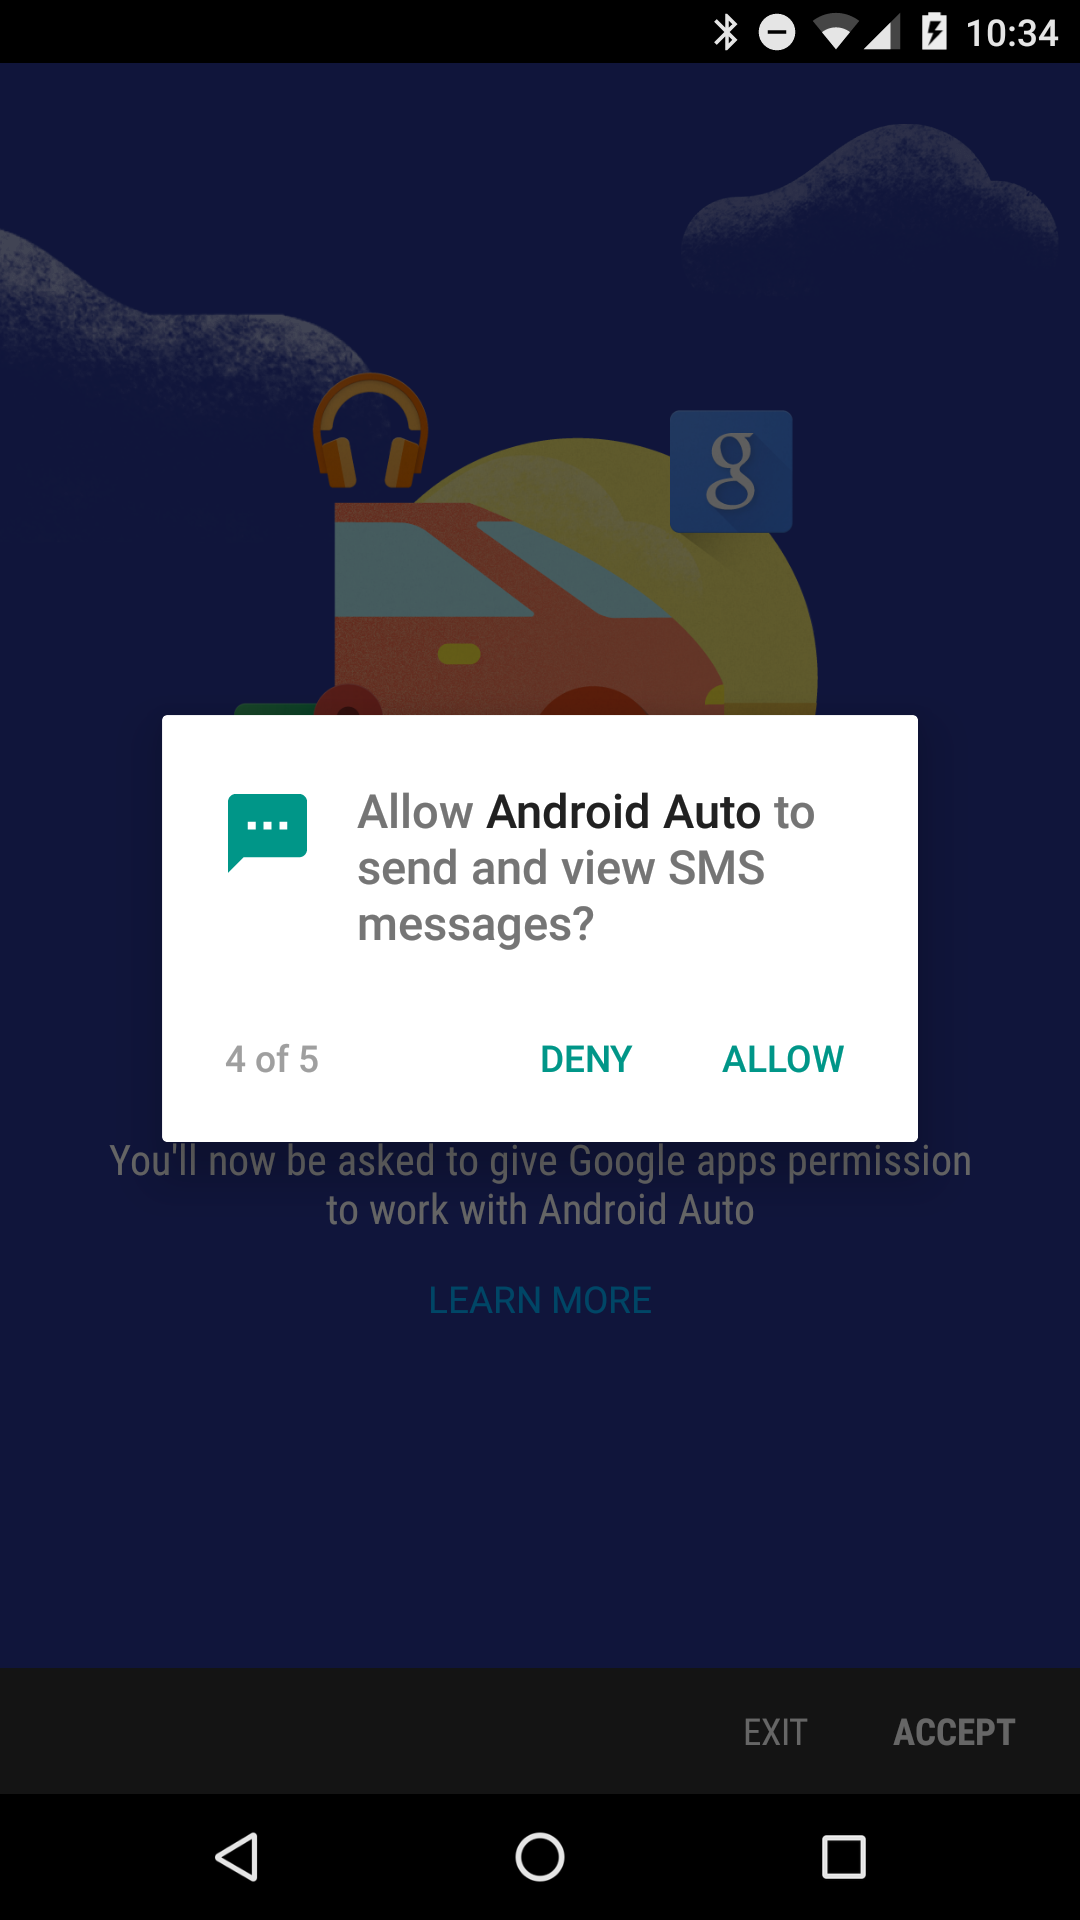 Android Auto and Android Marshmallow permissions